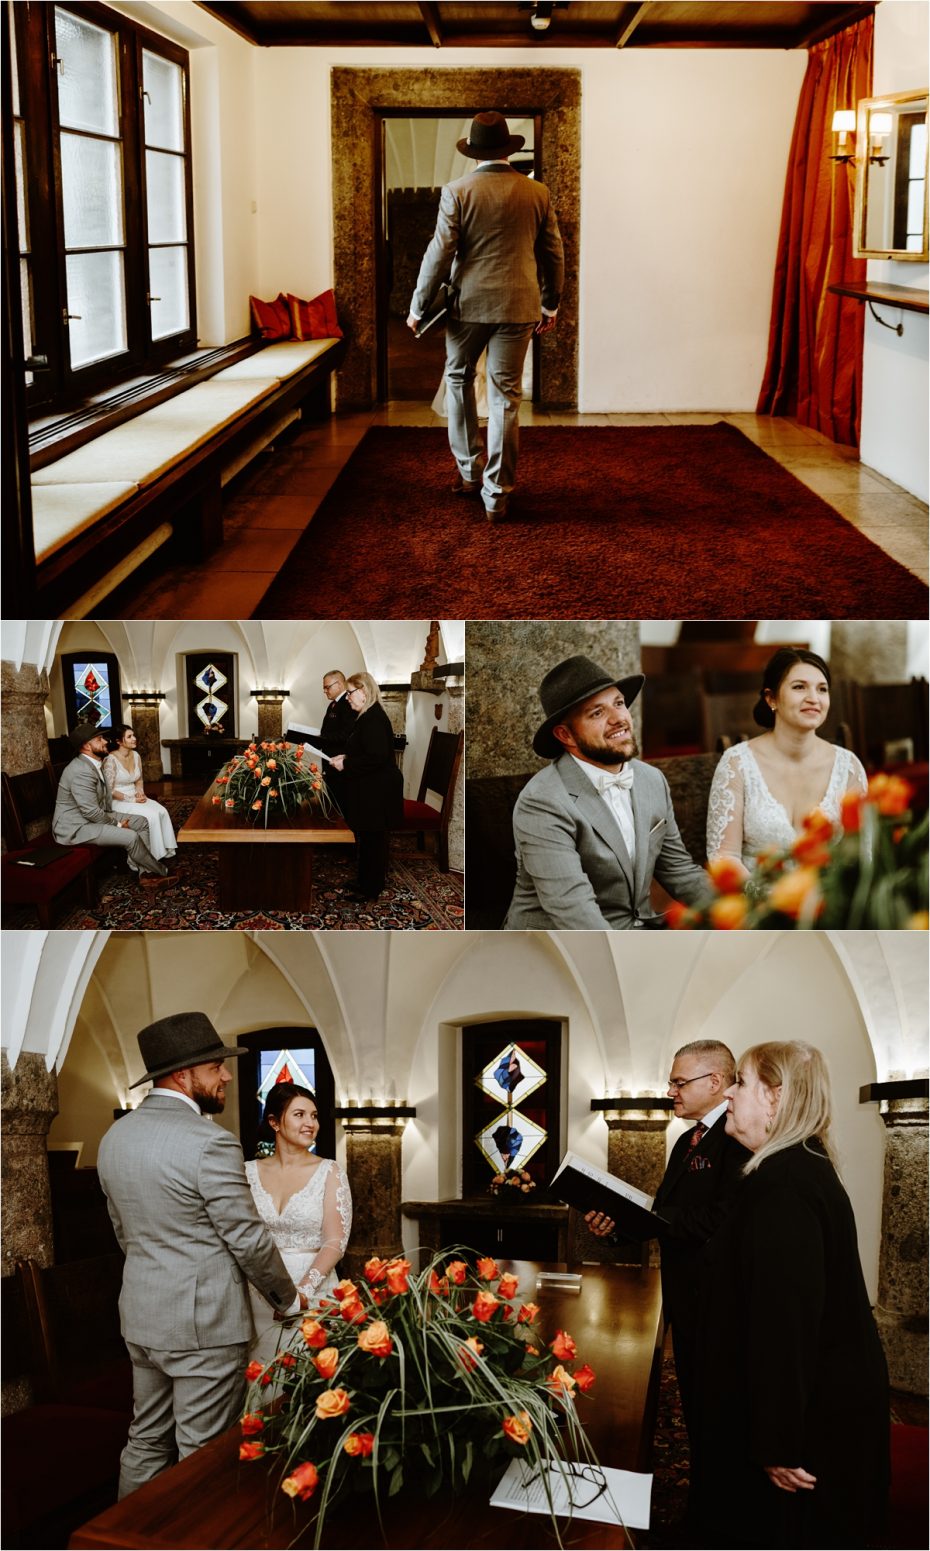 Elopement civil ceremony at Innsbruck registry office. Photos by Wild Connections Photography